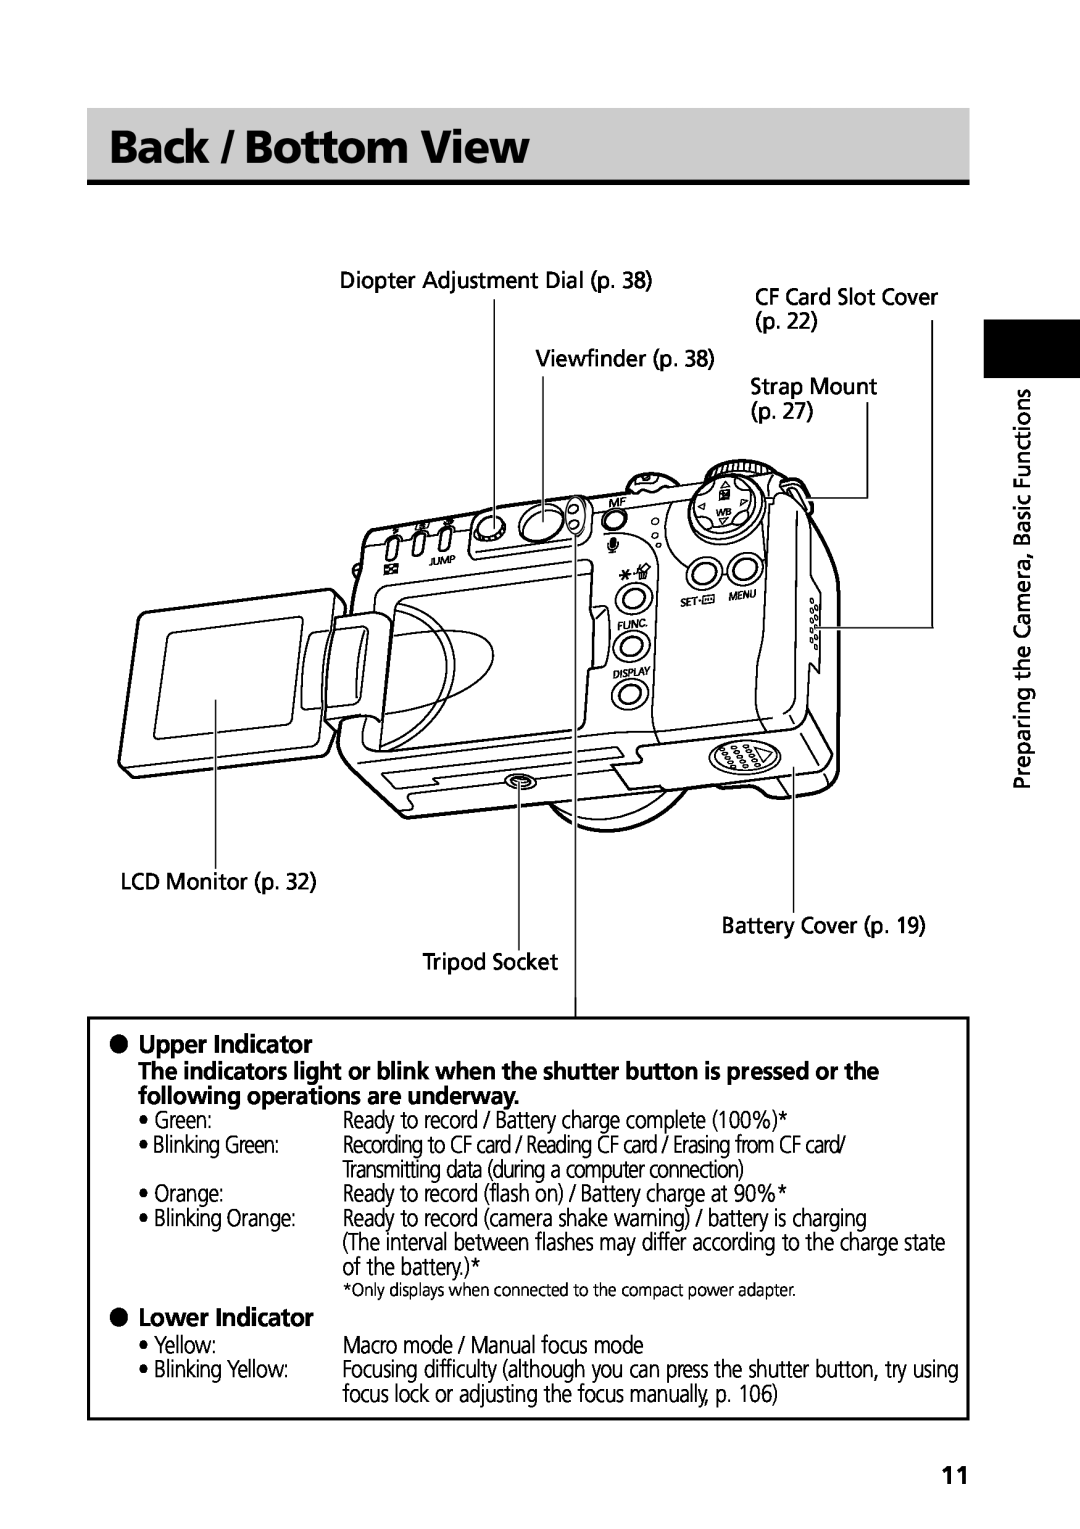 Canon G3 manual Back / Bottom View, Upper Indicator, Lower Indicator 